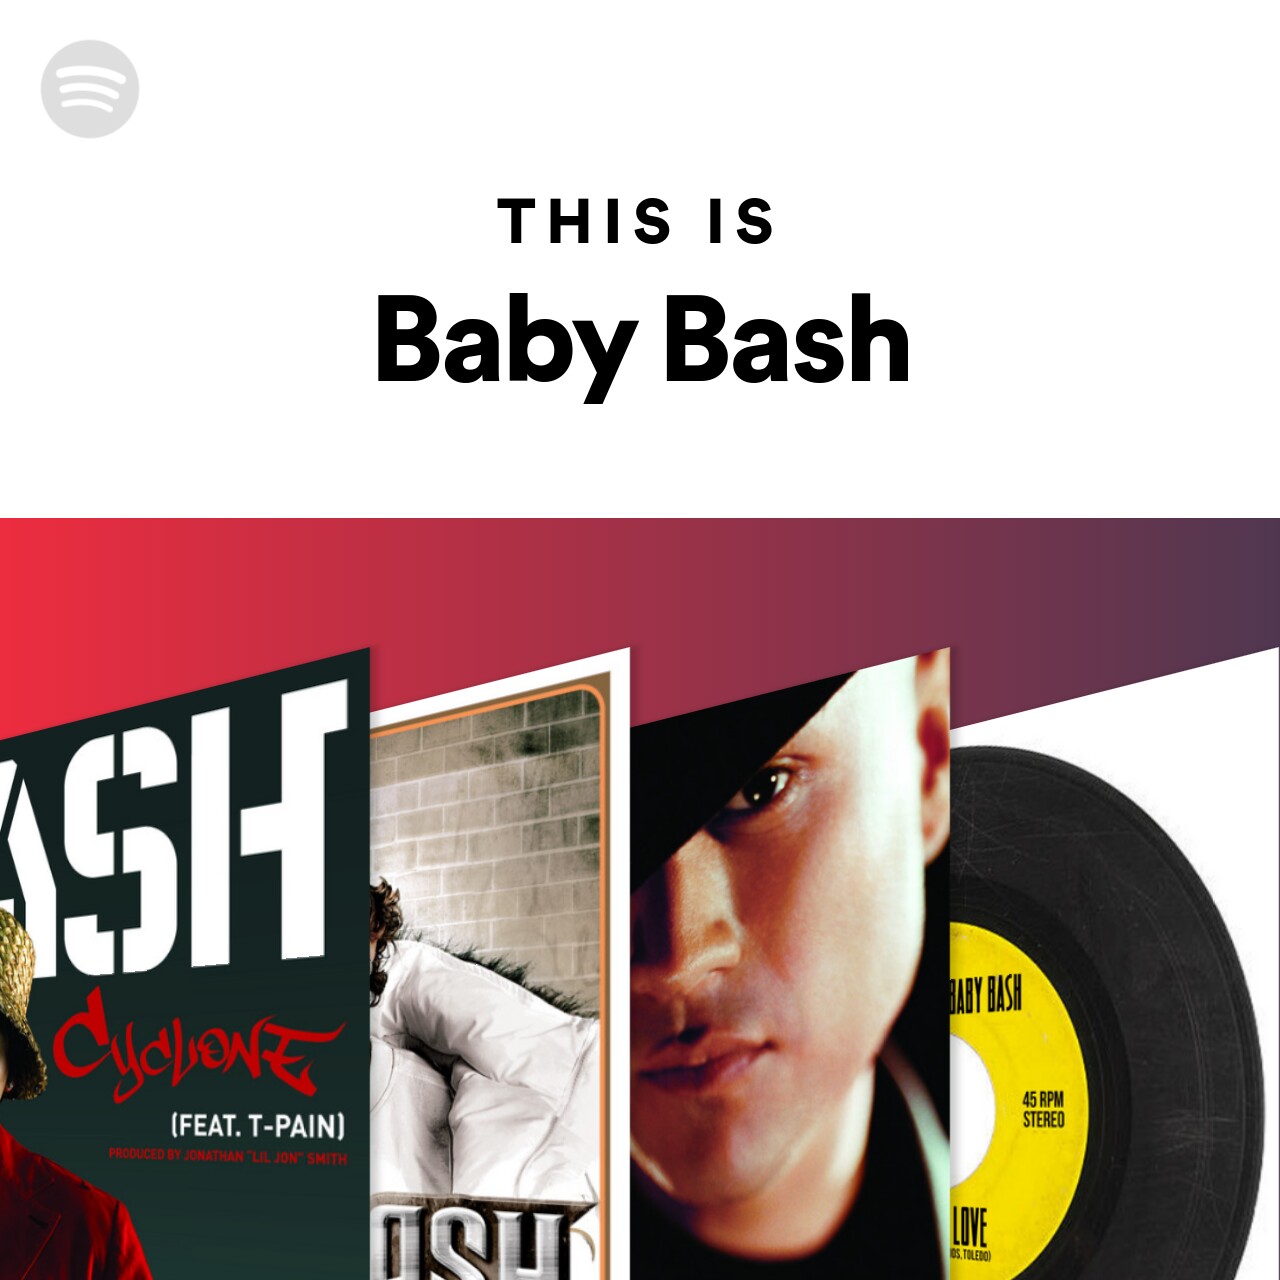 This Is Baby Bash Spotify Playlist